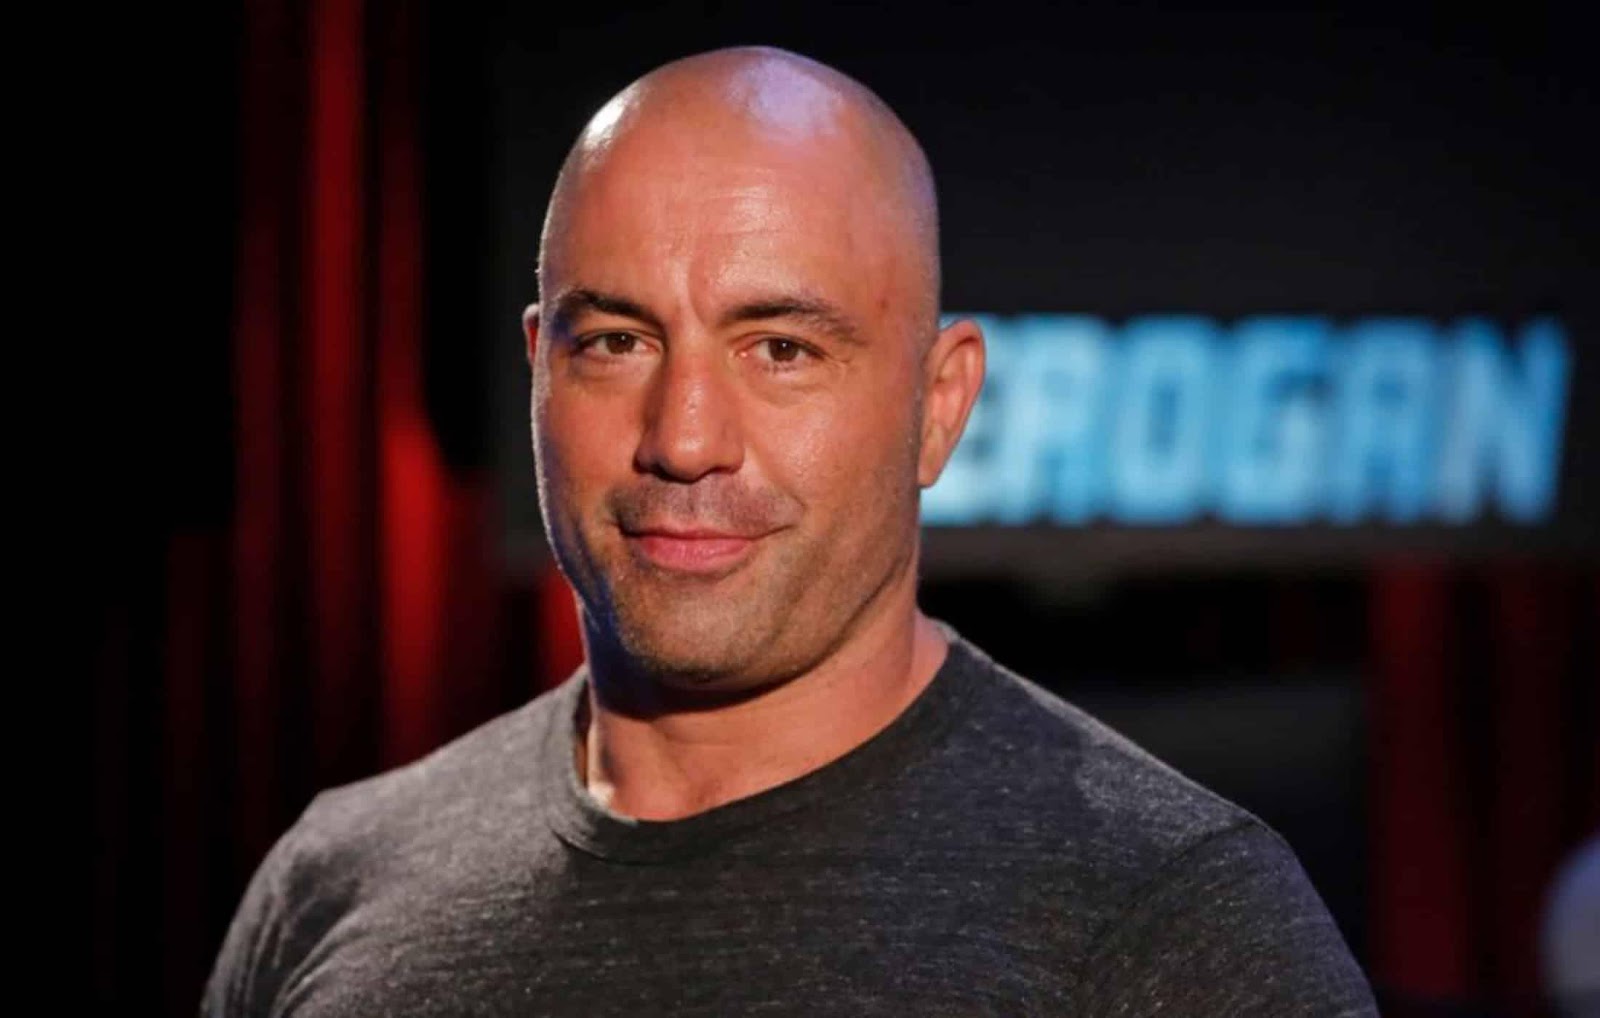 Joe Rogan Net Worth 2022: Cars, Salary, Assets, Income Source, House and Lifestyle